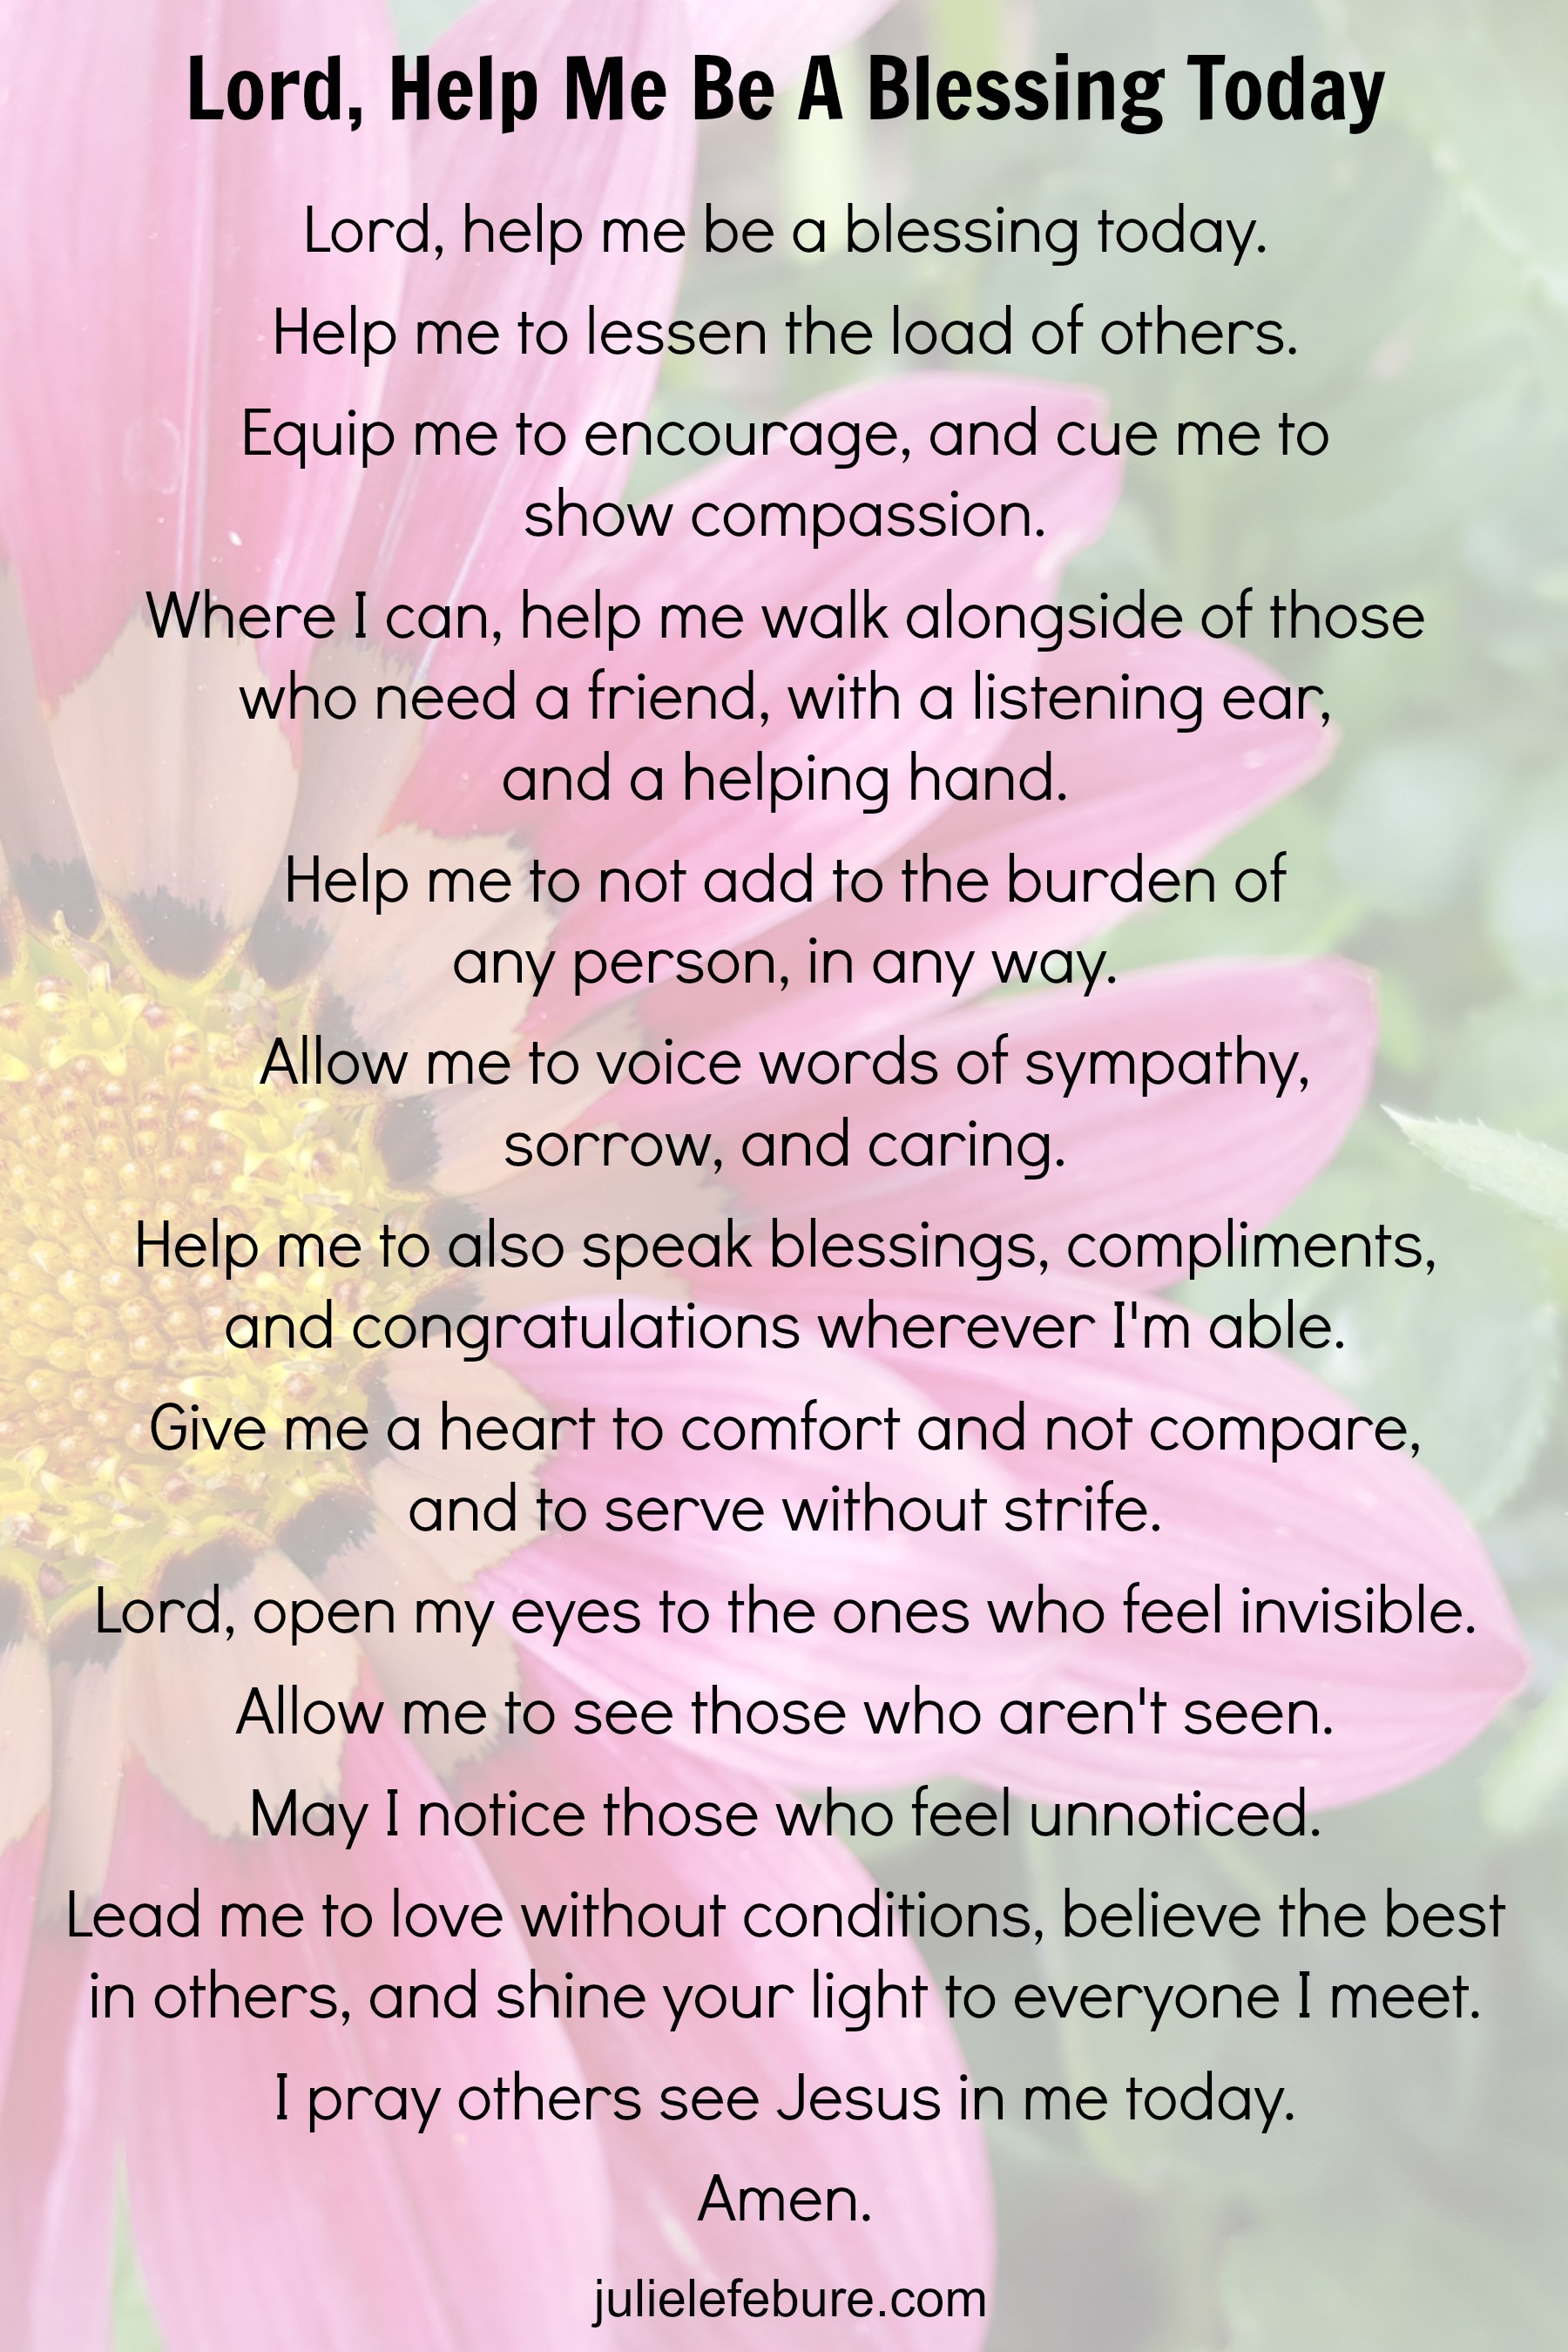 blessing help lord prayer god prayers meeting before morning praying quotes closing julie guidance julielefebure blessed bless thank words christian